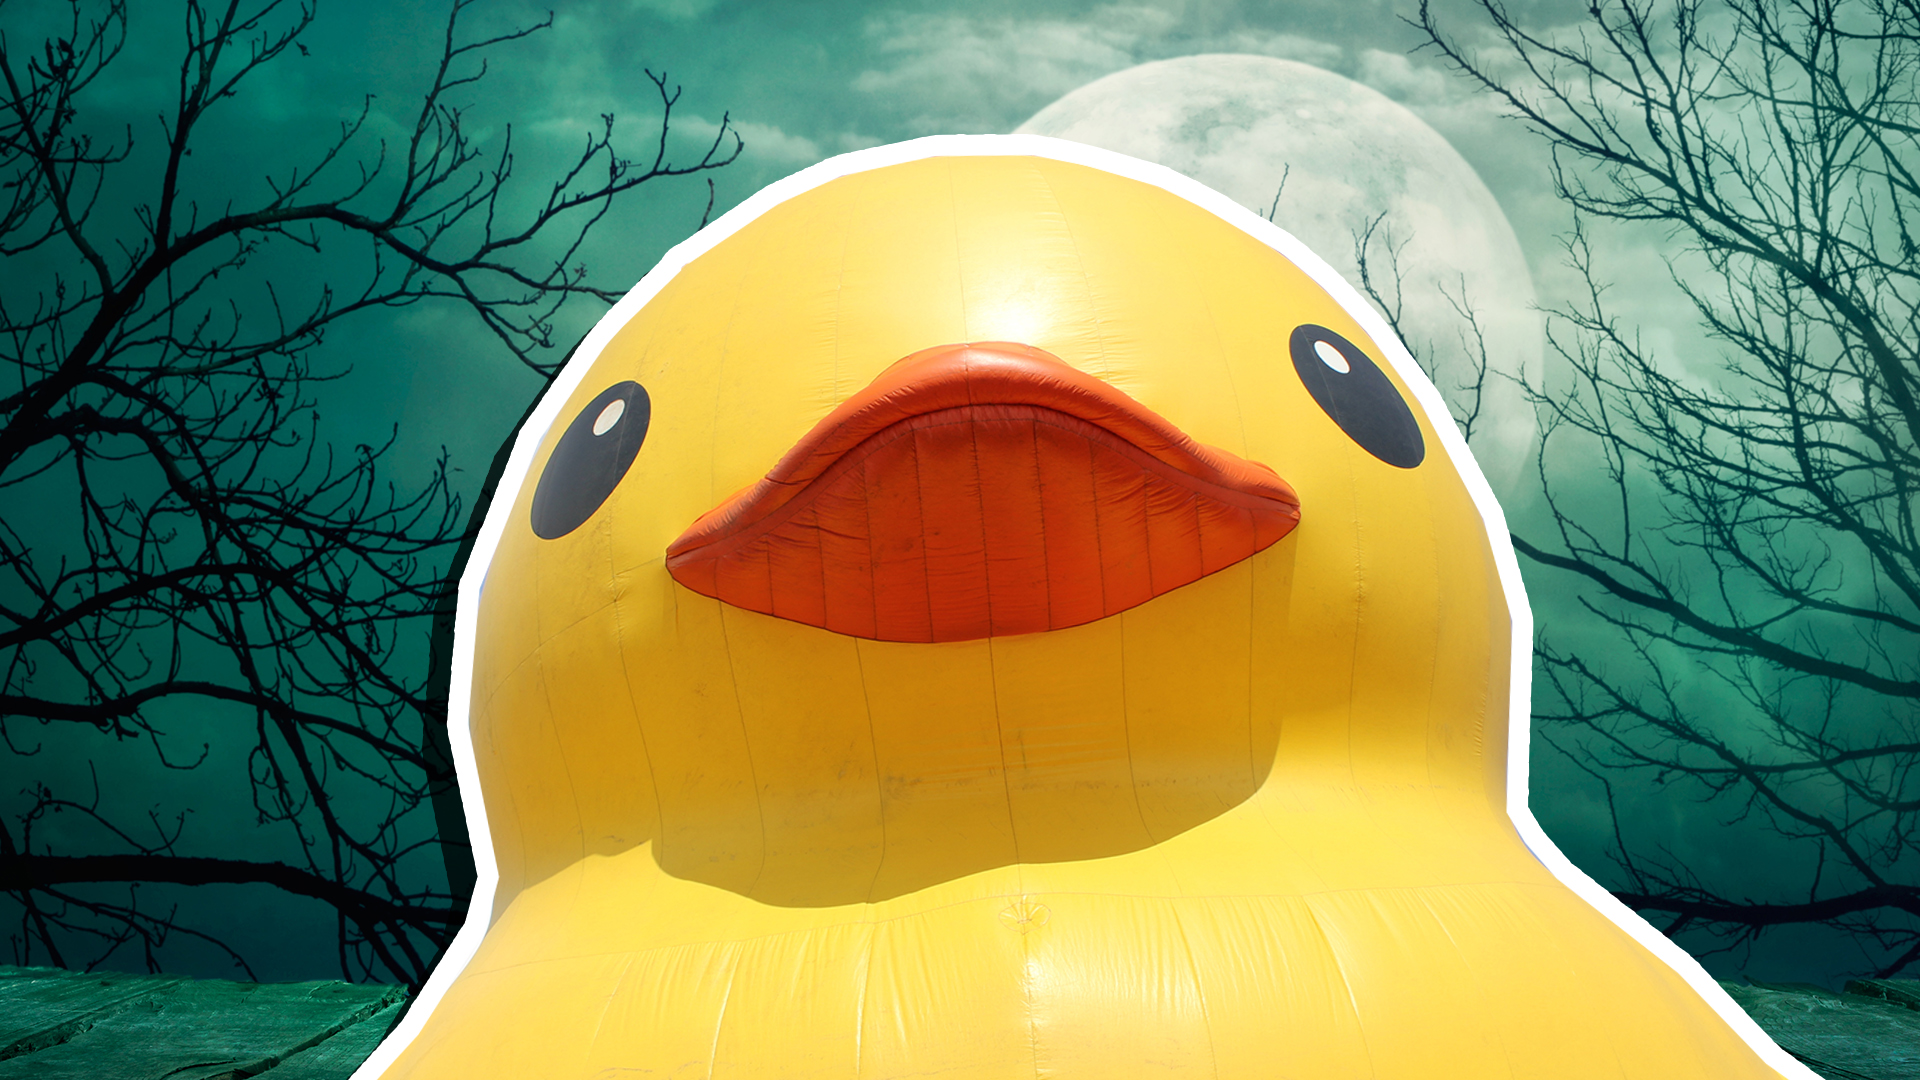 Large yellow inflatable duck in front of a full moon